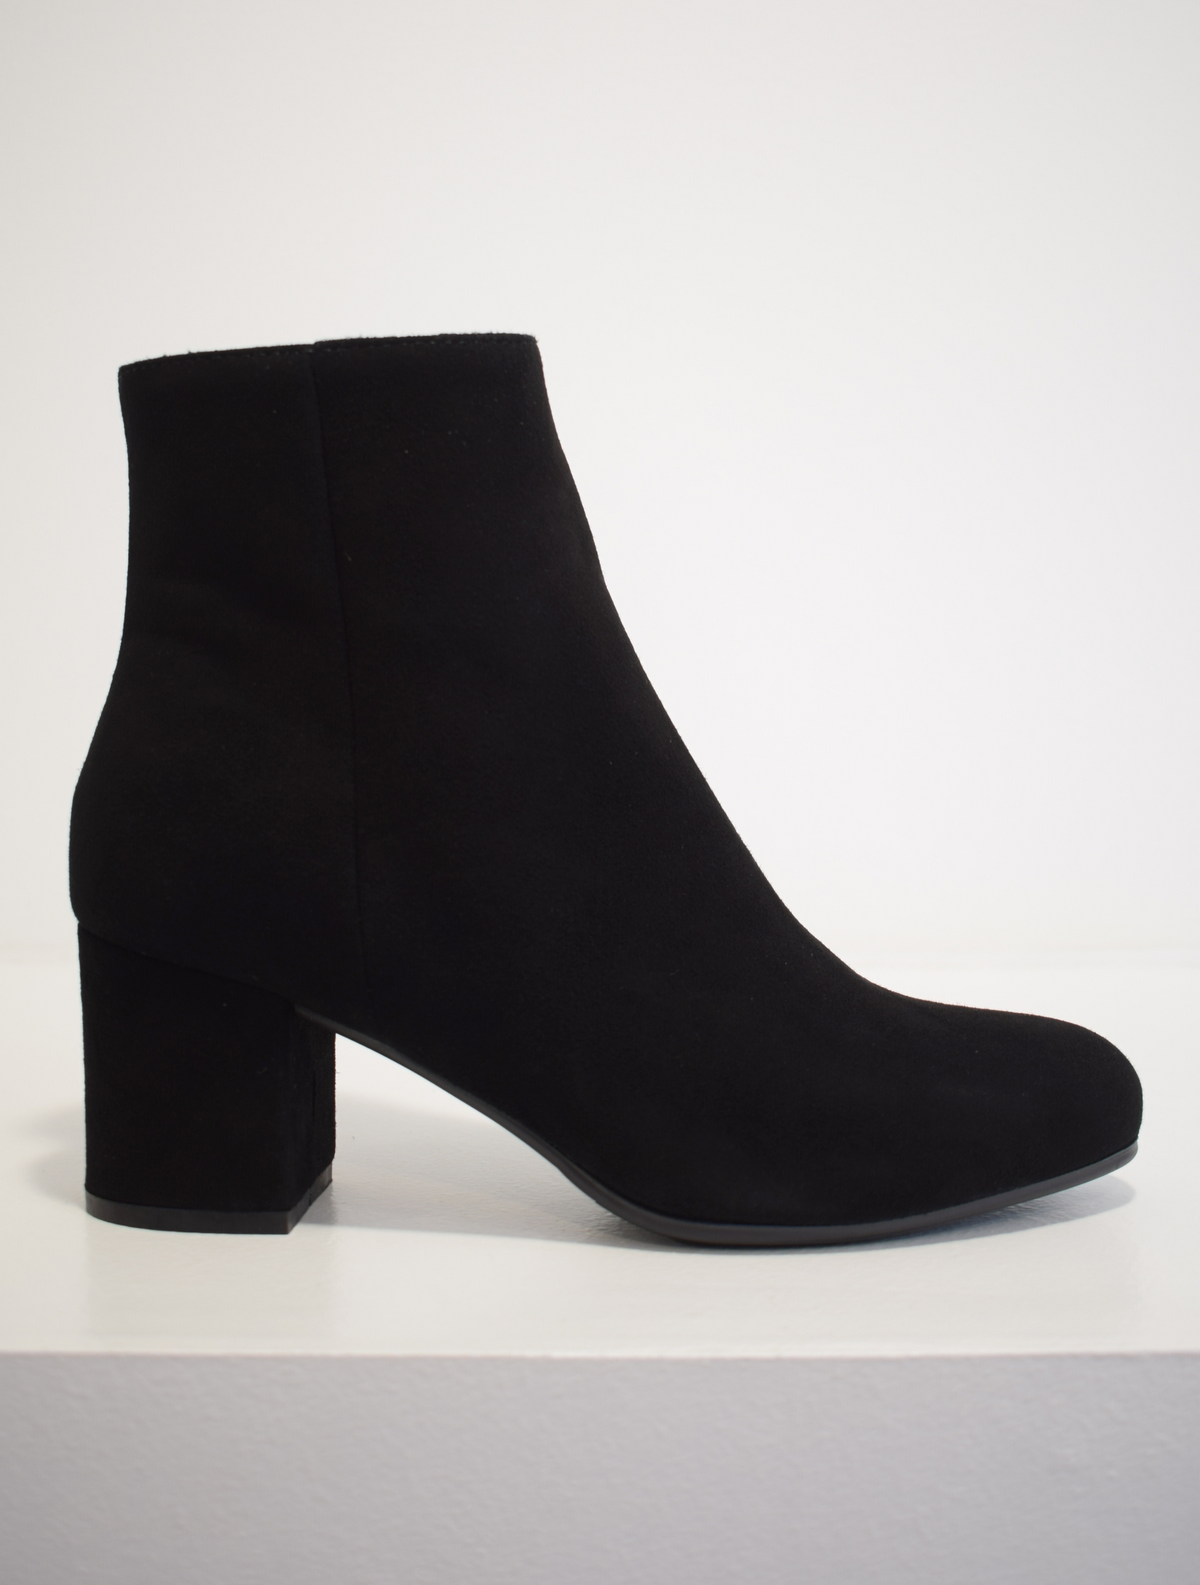 black suede ankle boot with side zip and almond toe